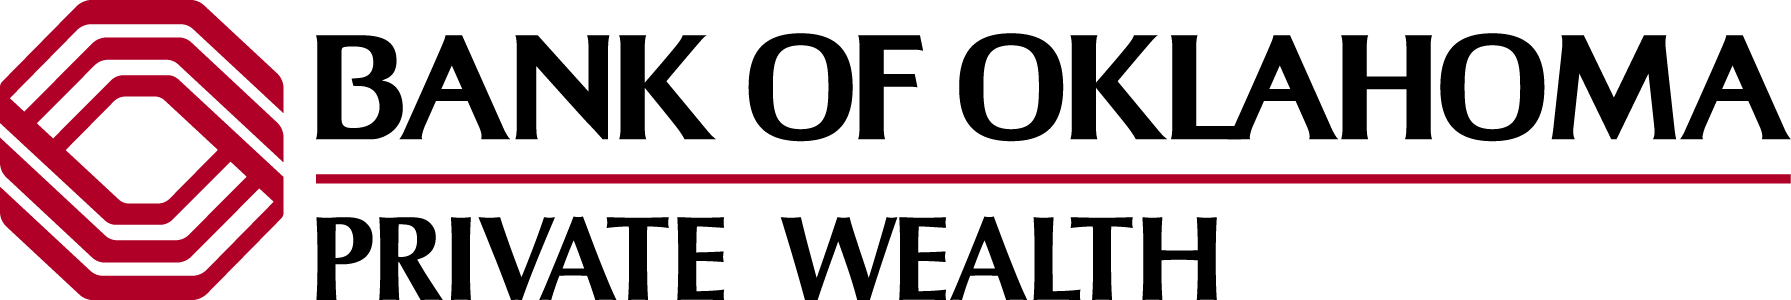 Bank of Oklahoma Private Wealth logo